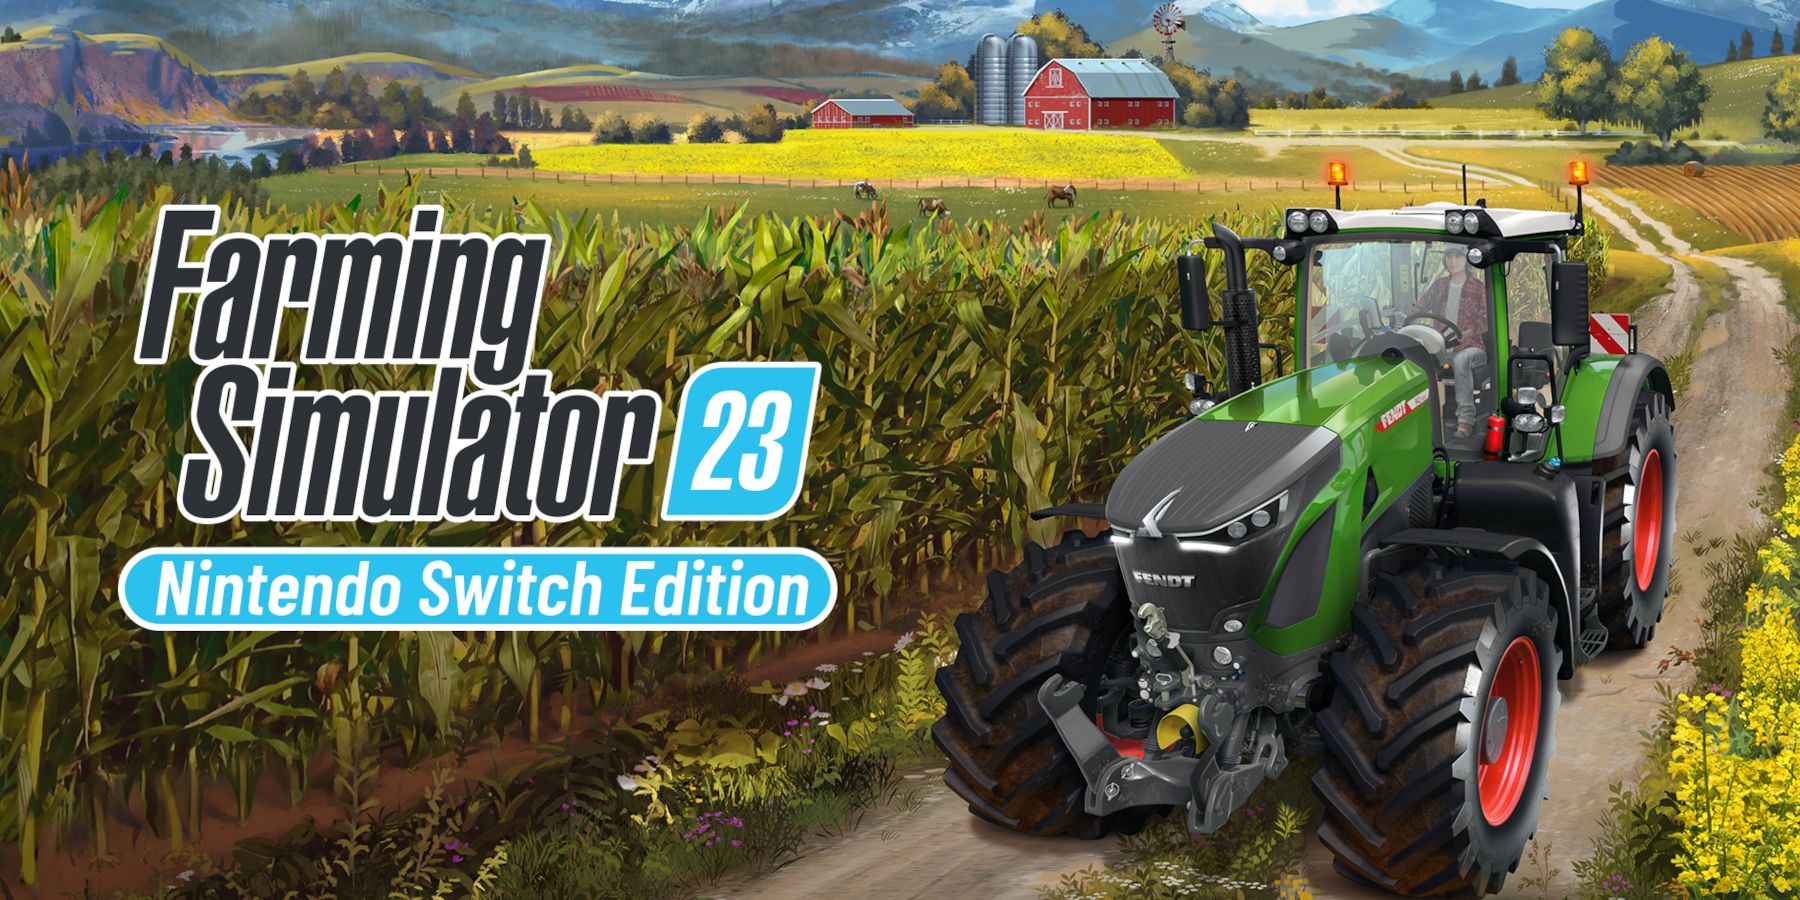 Farming Simulator 22 Potatoes: Complete guide - How to grow, sell